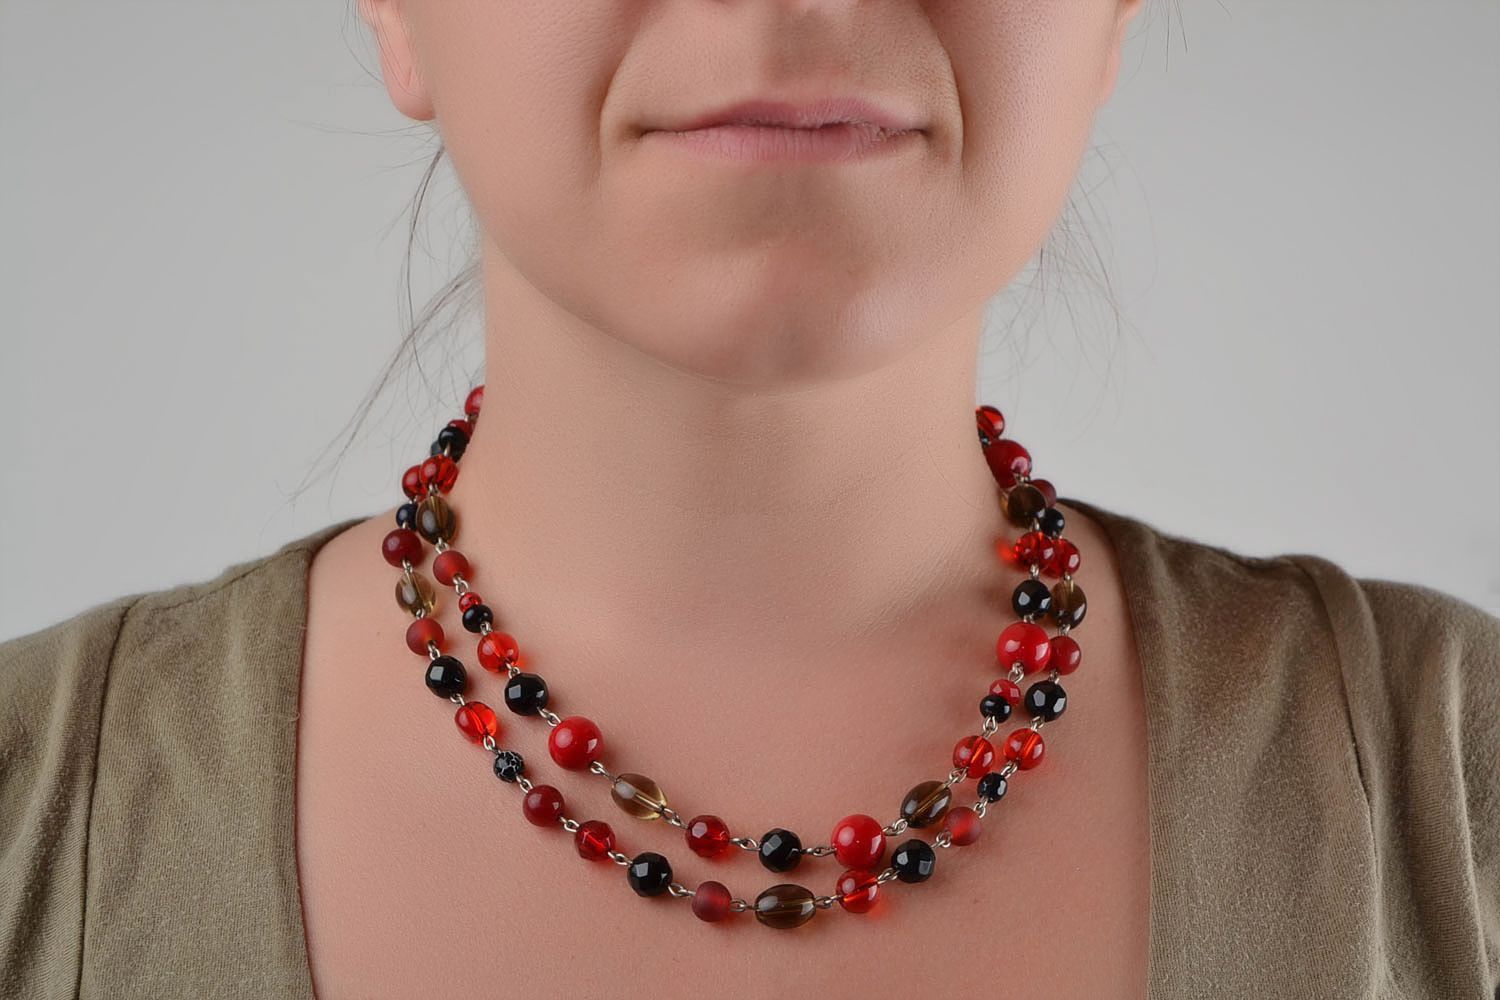 Handmade long women's necklace with natural stone and glass beads red and black photo 2